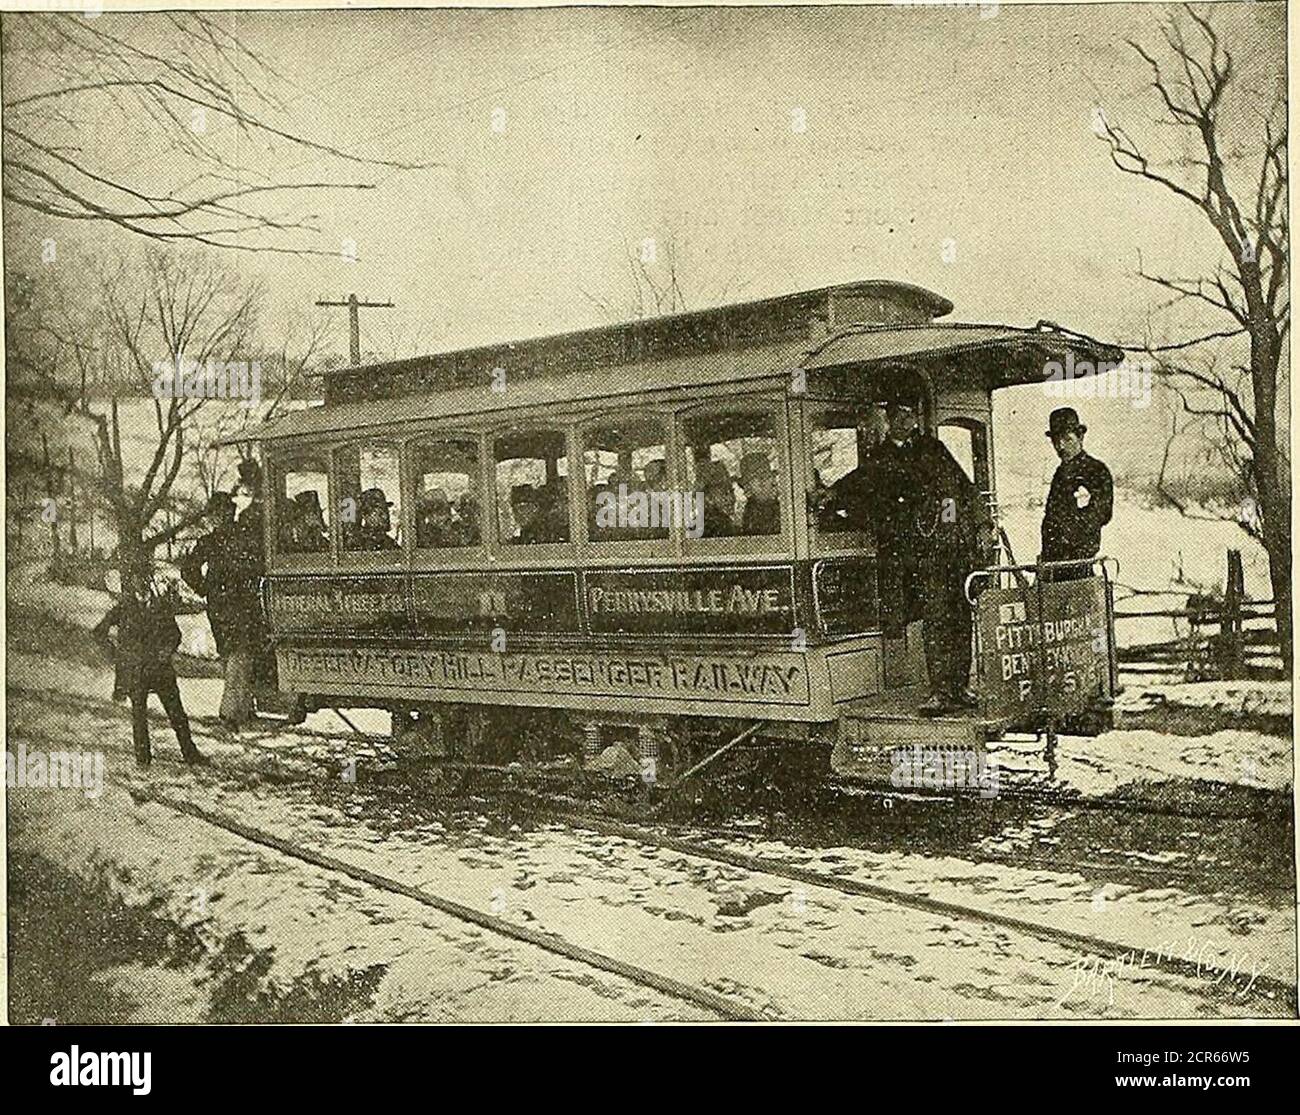 . Electric railway gazette . -ditional car, and many of the motorcars will tow two additional cars.The success of the Thomson Hous-ton system on the Omaha andCouncil Bluffs line has made thecitizens of Omaha jubilant at theimmediate prospect of such rapidtransit being given them over theirentire city. In addition to theequipment ready to be put in, thecompany intends to add twenty ad-ditional motor cars upon the exten-sions to its system within a fewmonths. The Thomson.Houston companyhas recently closed a contract forthe electrical equipment of the Pe-oria, Illinois, Street Railway system.One Stock Photo